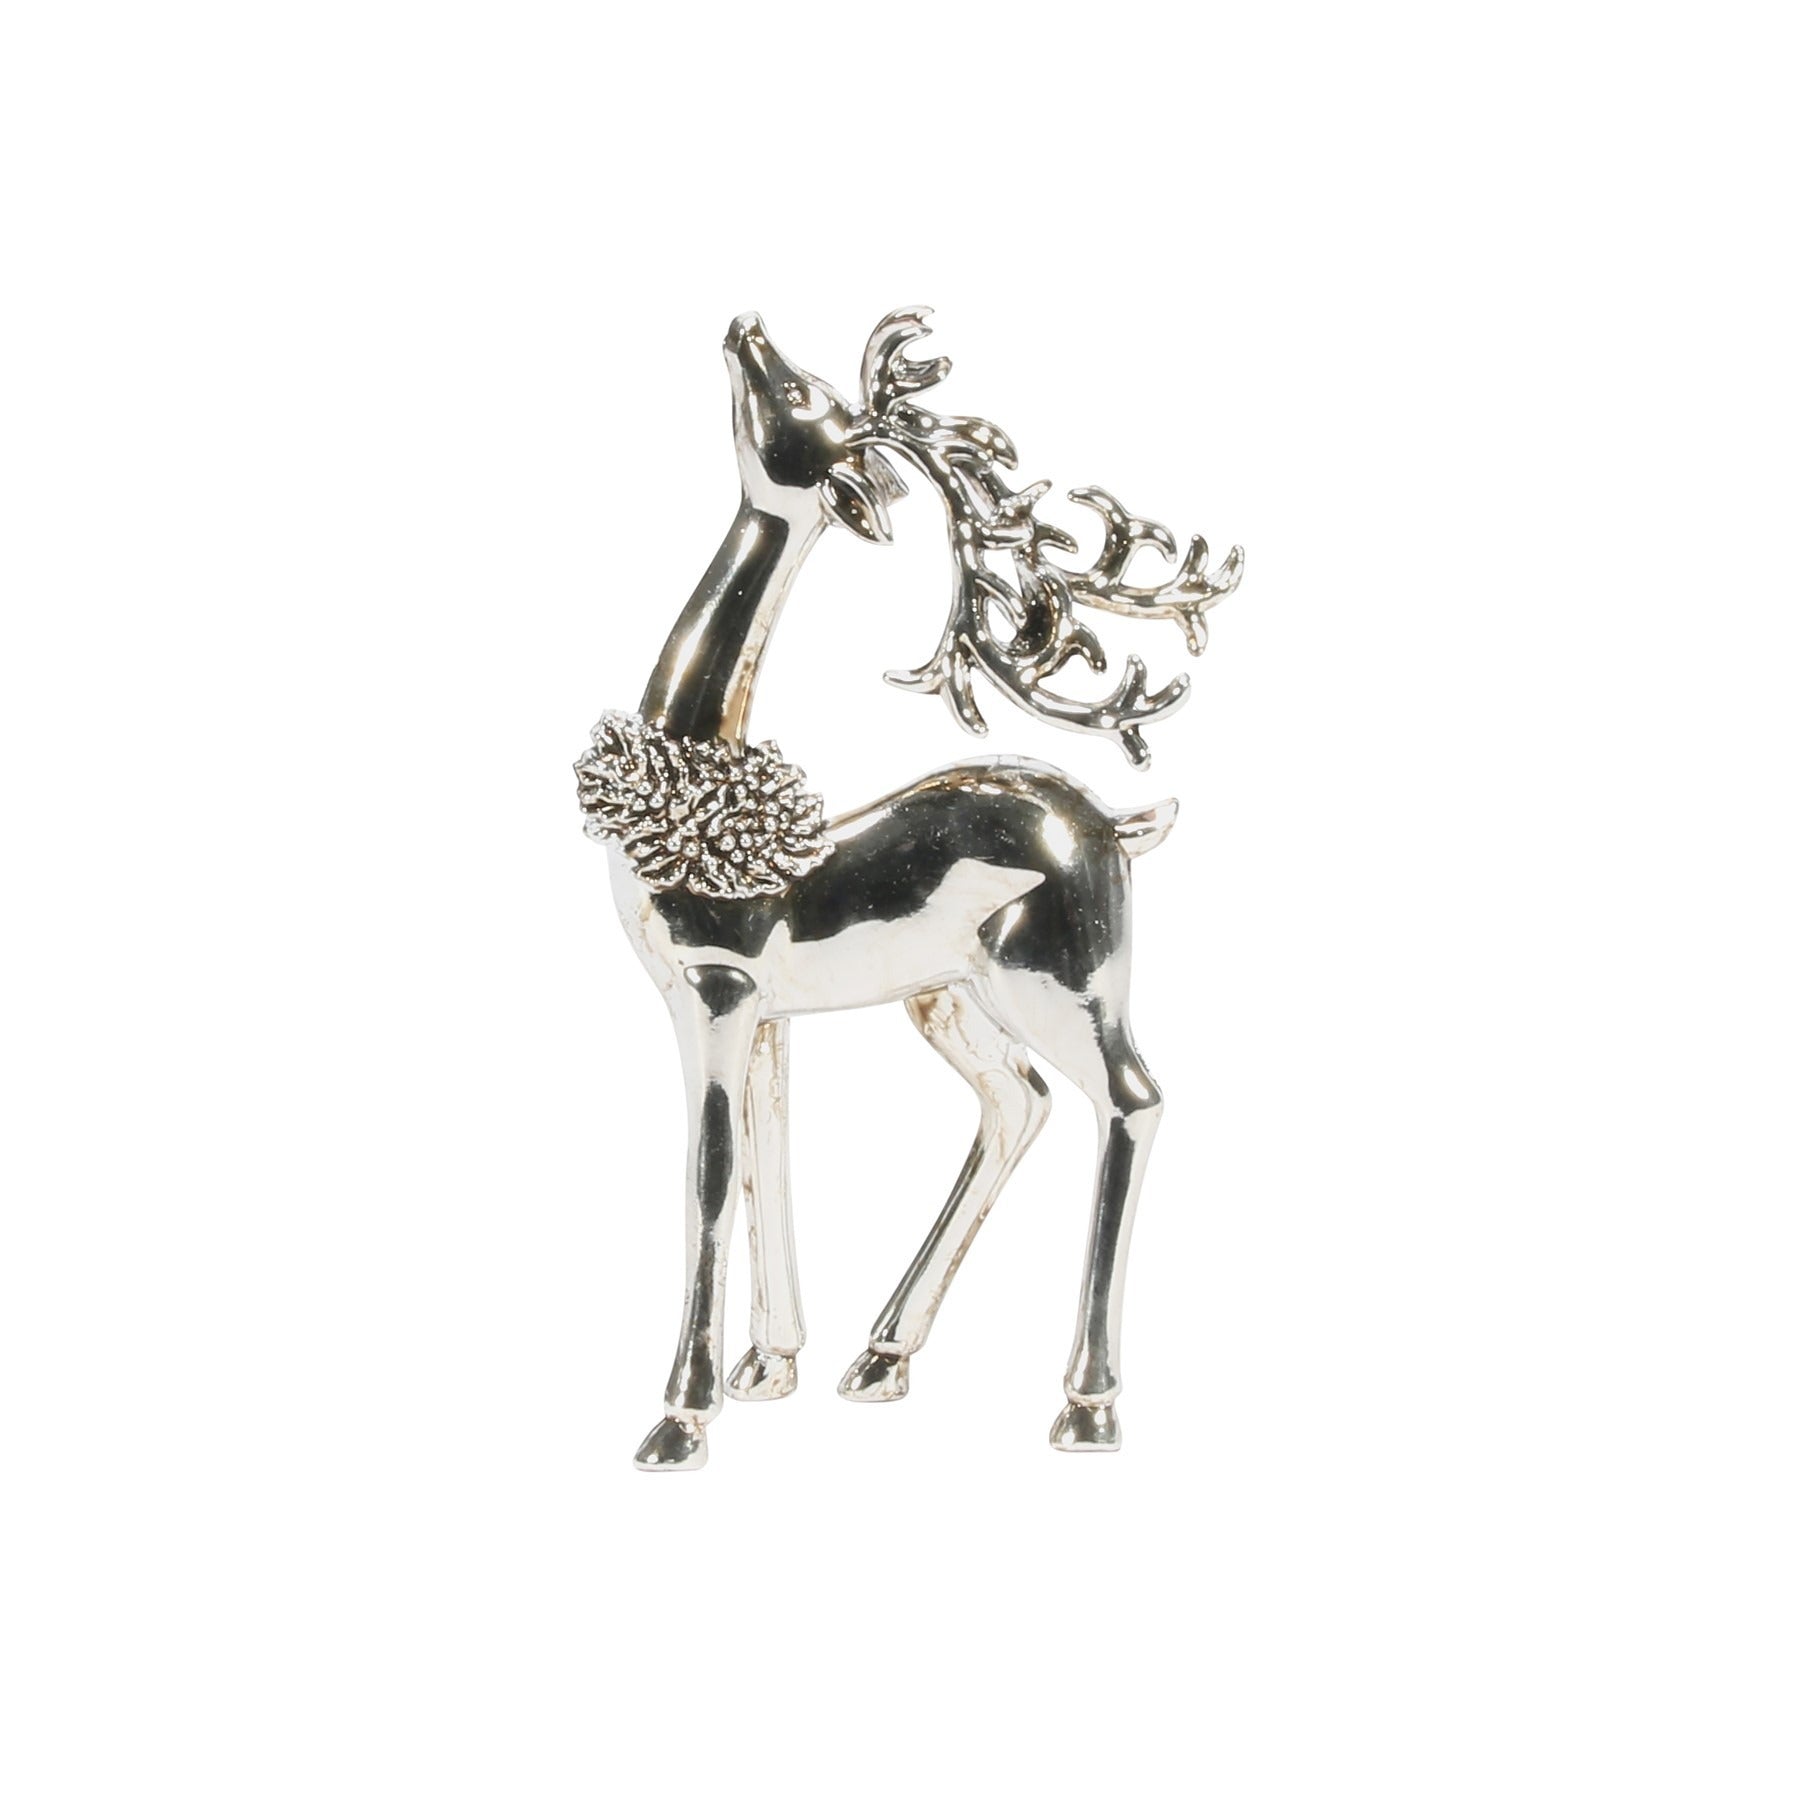 View Silver Assorted Reindeer Hanging Decorations information